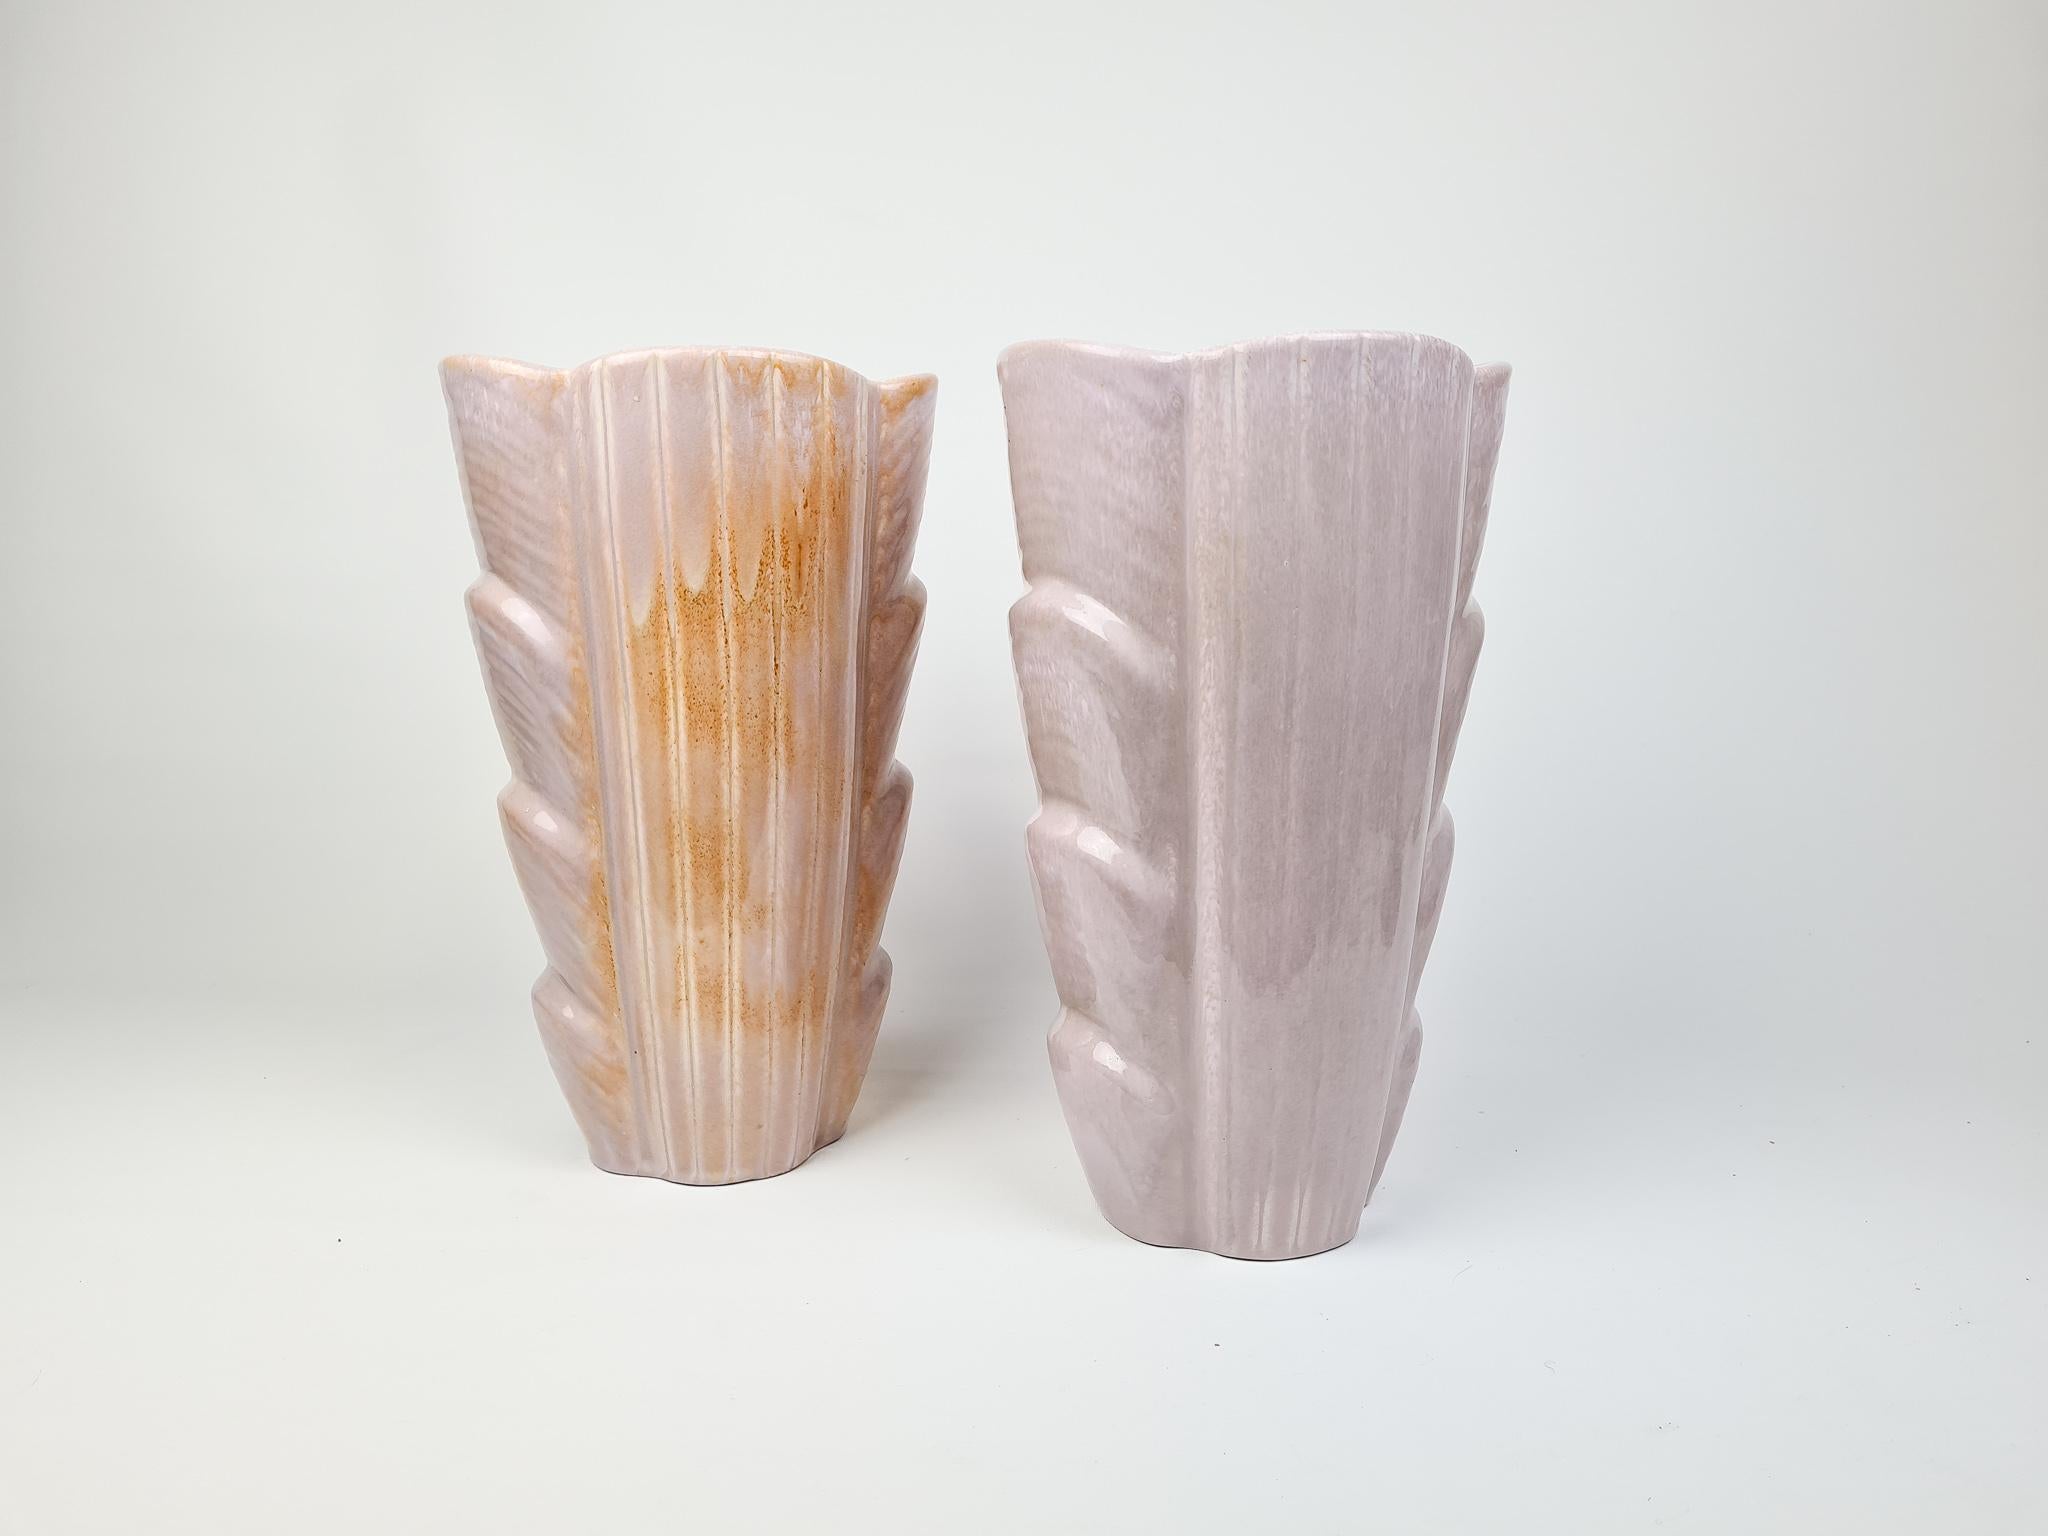 Exceptional quality over these vases produced in Sweden at Rörstrand factory and designed by Gunnar Nylund. It was made in 1950s and has a nice shimmer glaze with fine lines.

Particularly good condition.

Measures: H 30 cm, W 18 cm, D 14 cm.
